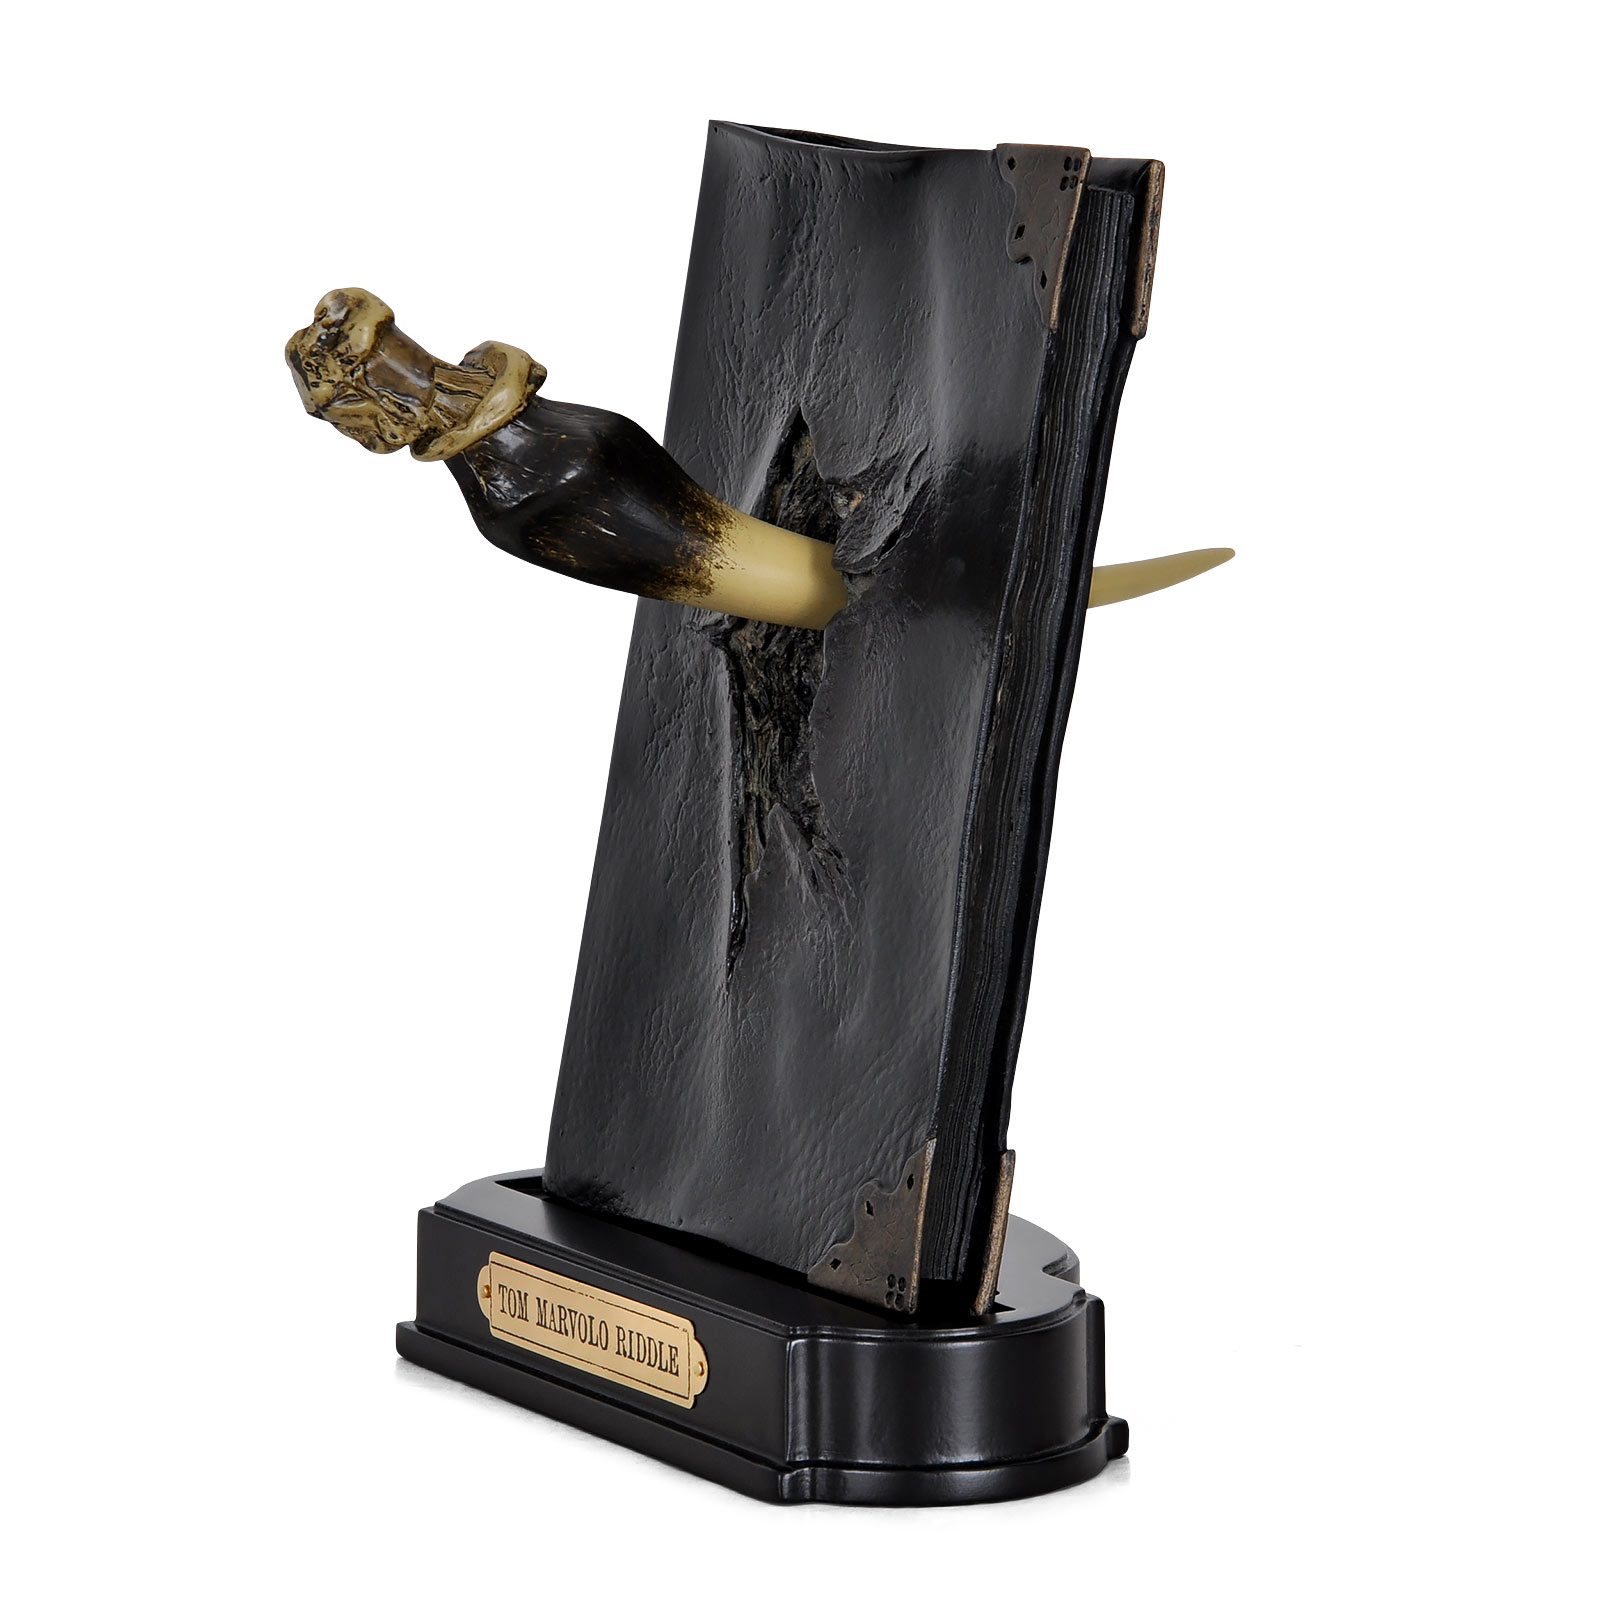 Harry Potter - Riddle Diary Statue with Basilisk Tooth